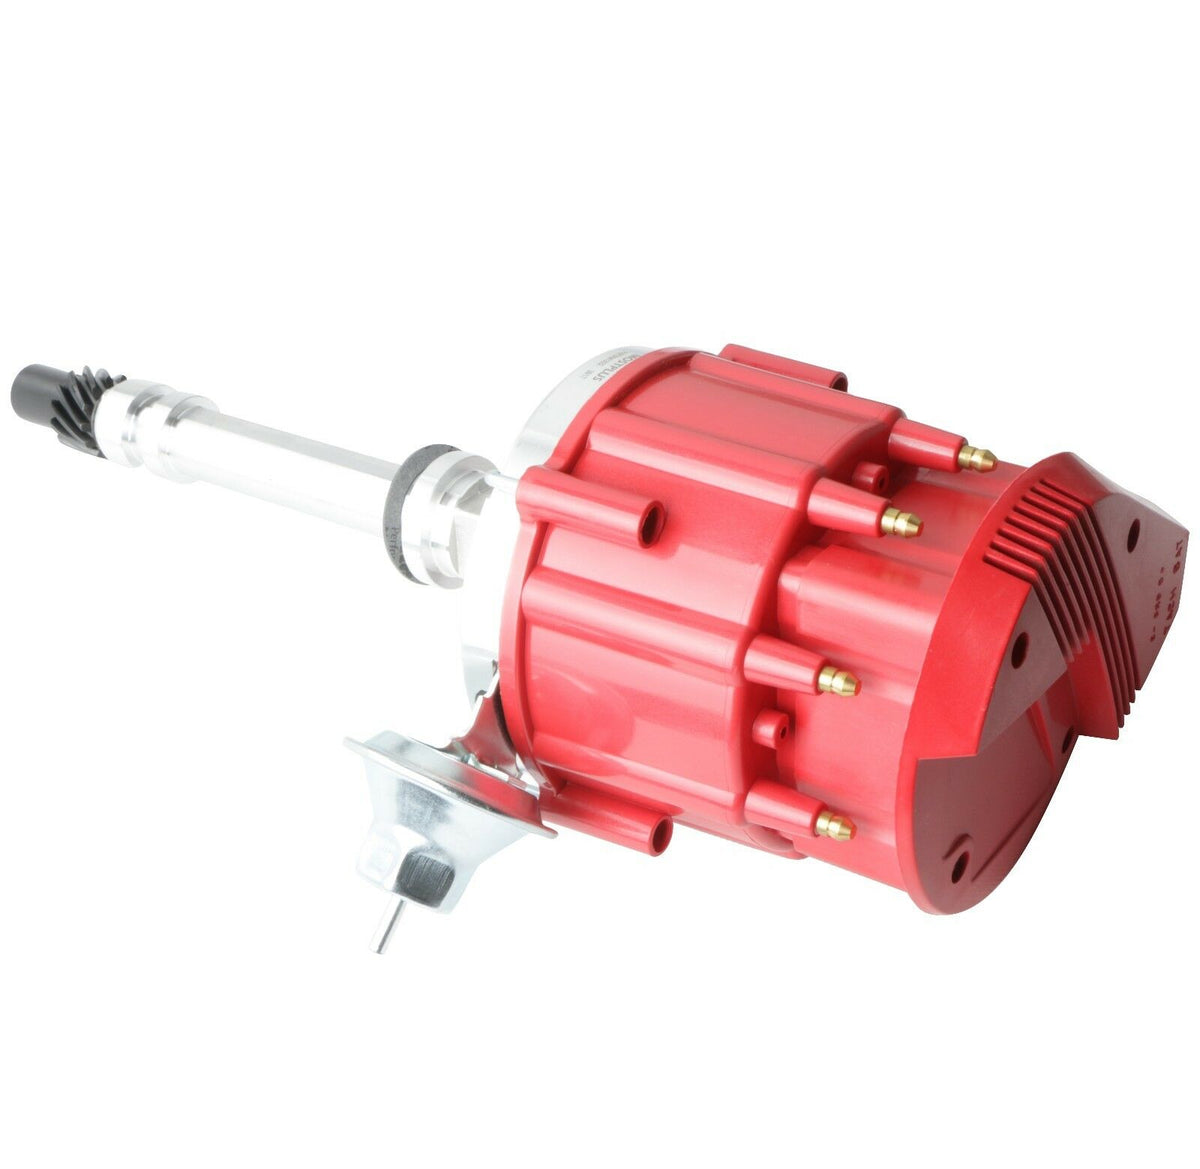 MOSTPLUS Racing HEI Distributor Red Cap Super Coil for Chevy SBC 305/3